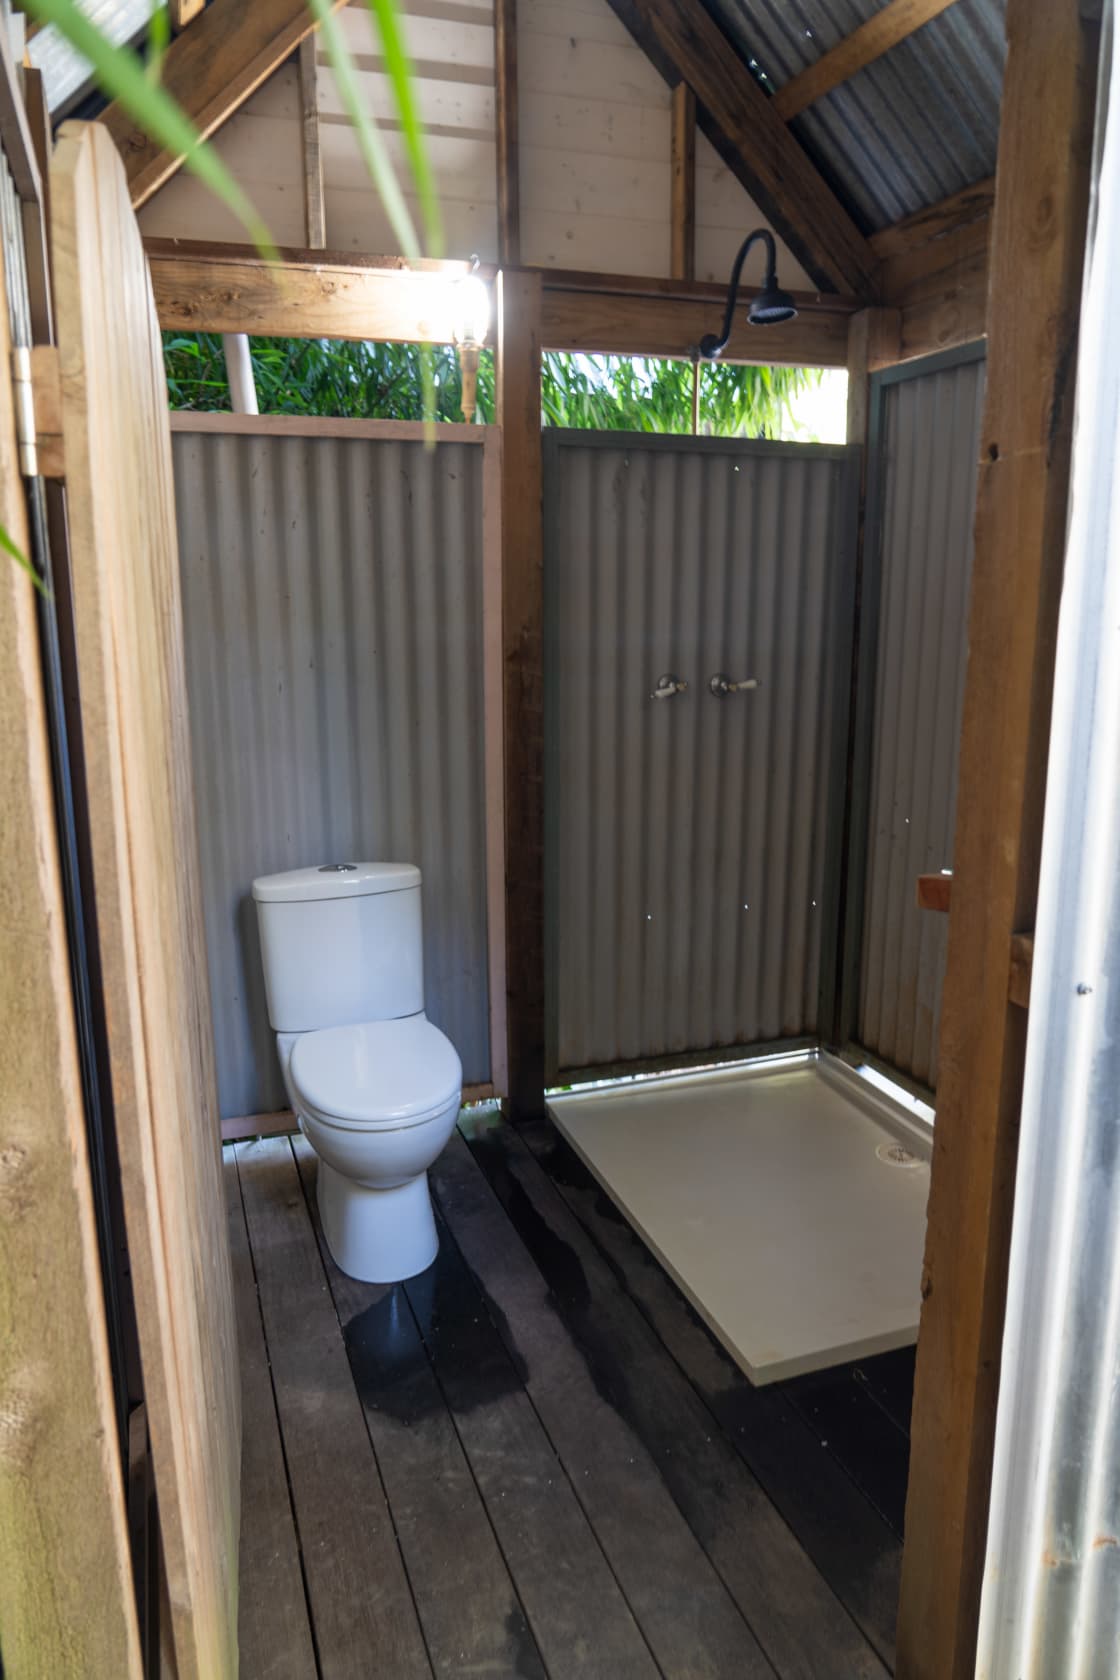 Nice clean amenities with a shower and toilet